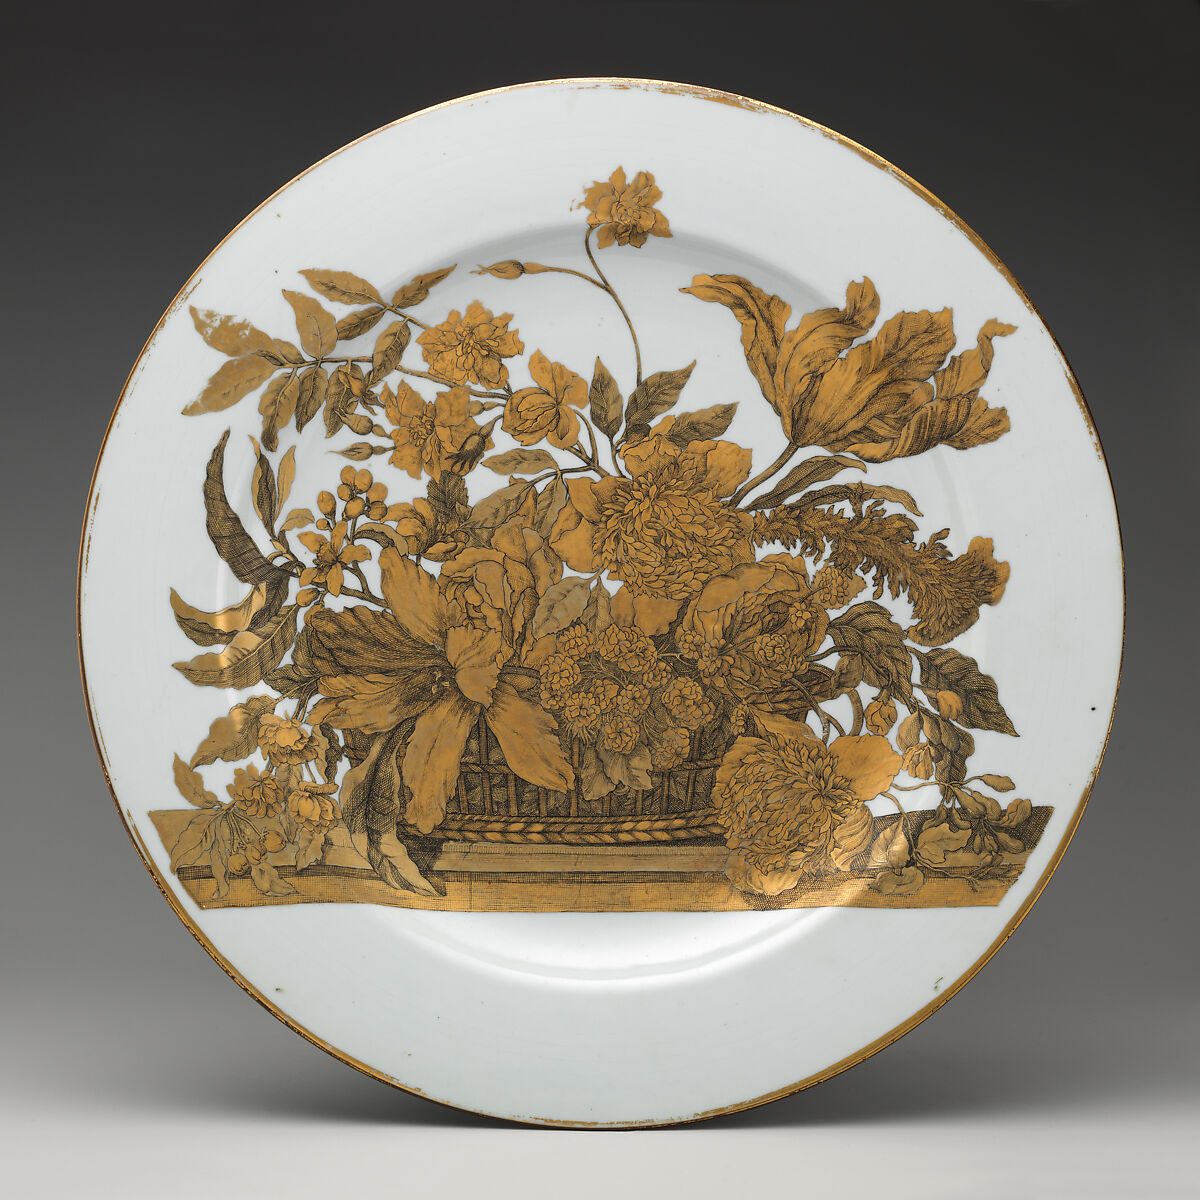 Plate (one of a pair), After engravings by Jean-Baptiste Monnoyer (French, Lille 1636–1699 London), Hard-paste porcelain with gilding, Chinese, possibly for Scottish market 